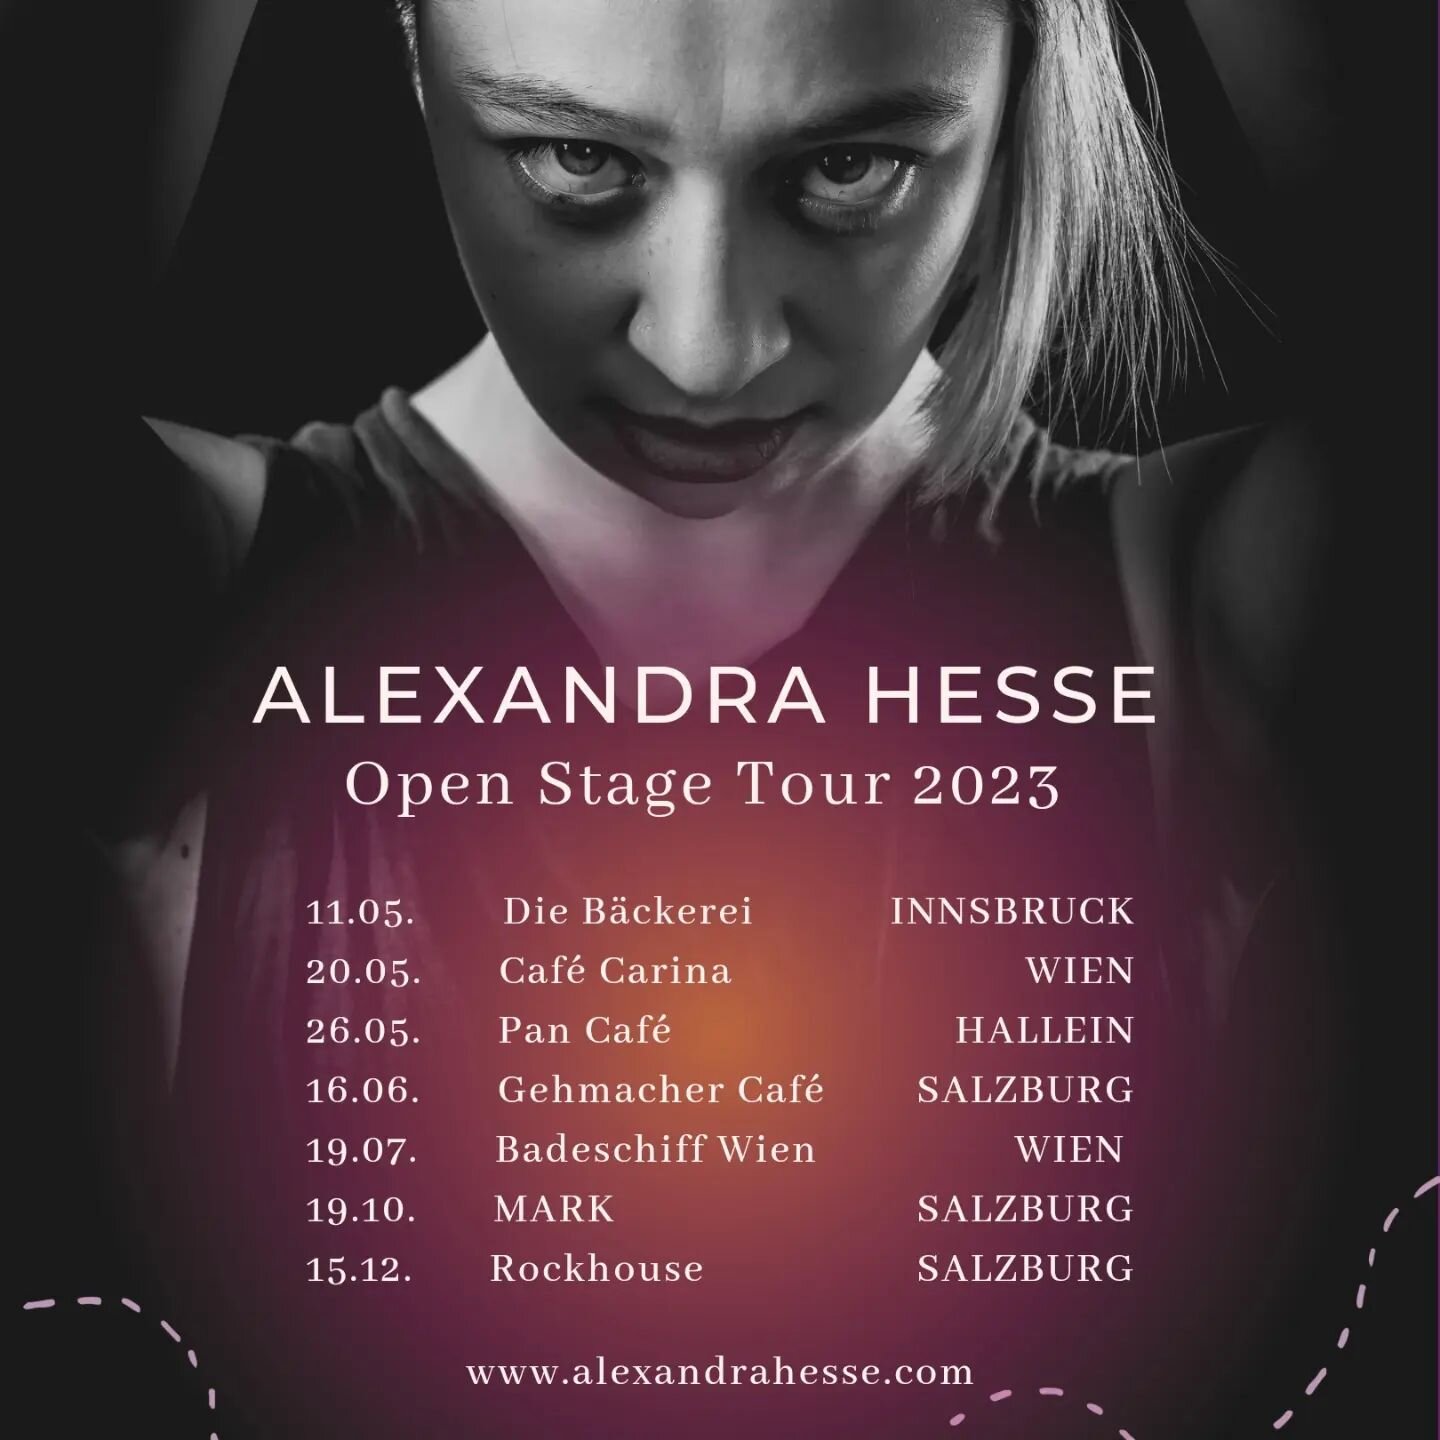 This is exciting!!!🤩 I'm hitting the road and starting my OPEN STAGE TOUR next month😊🎶 

Guys, I'm off to climb every mountain and play every stage that will have me😄💪 Almost all shows will be pay as you wish, so stop by for some good music and 